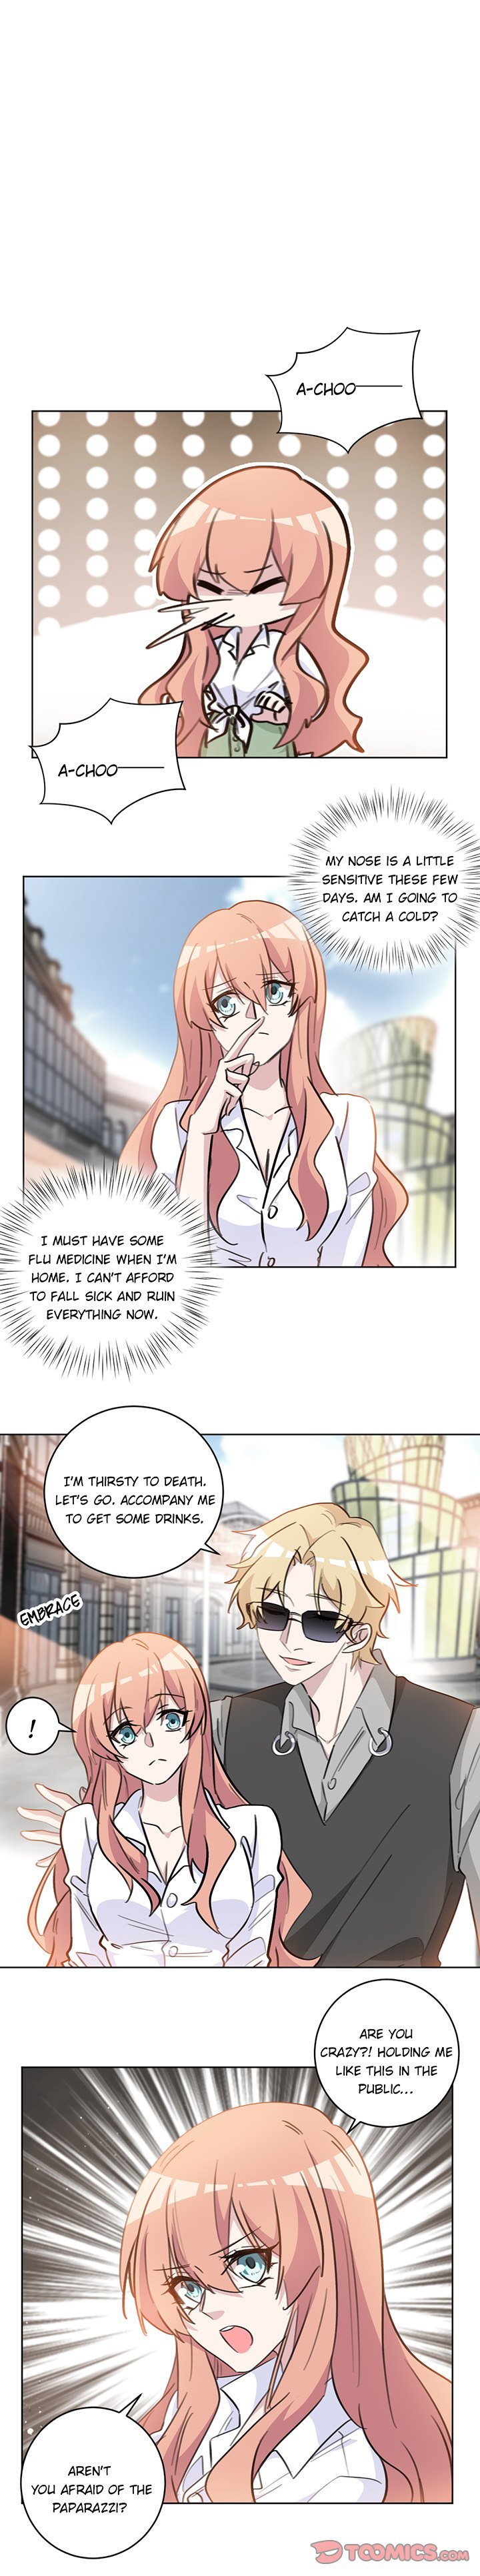 your-turn-to-chase-after-me-chap-39-3